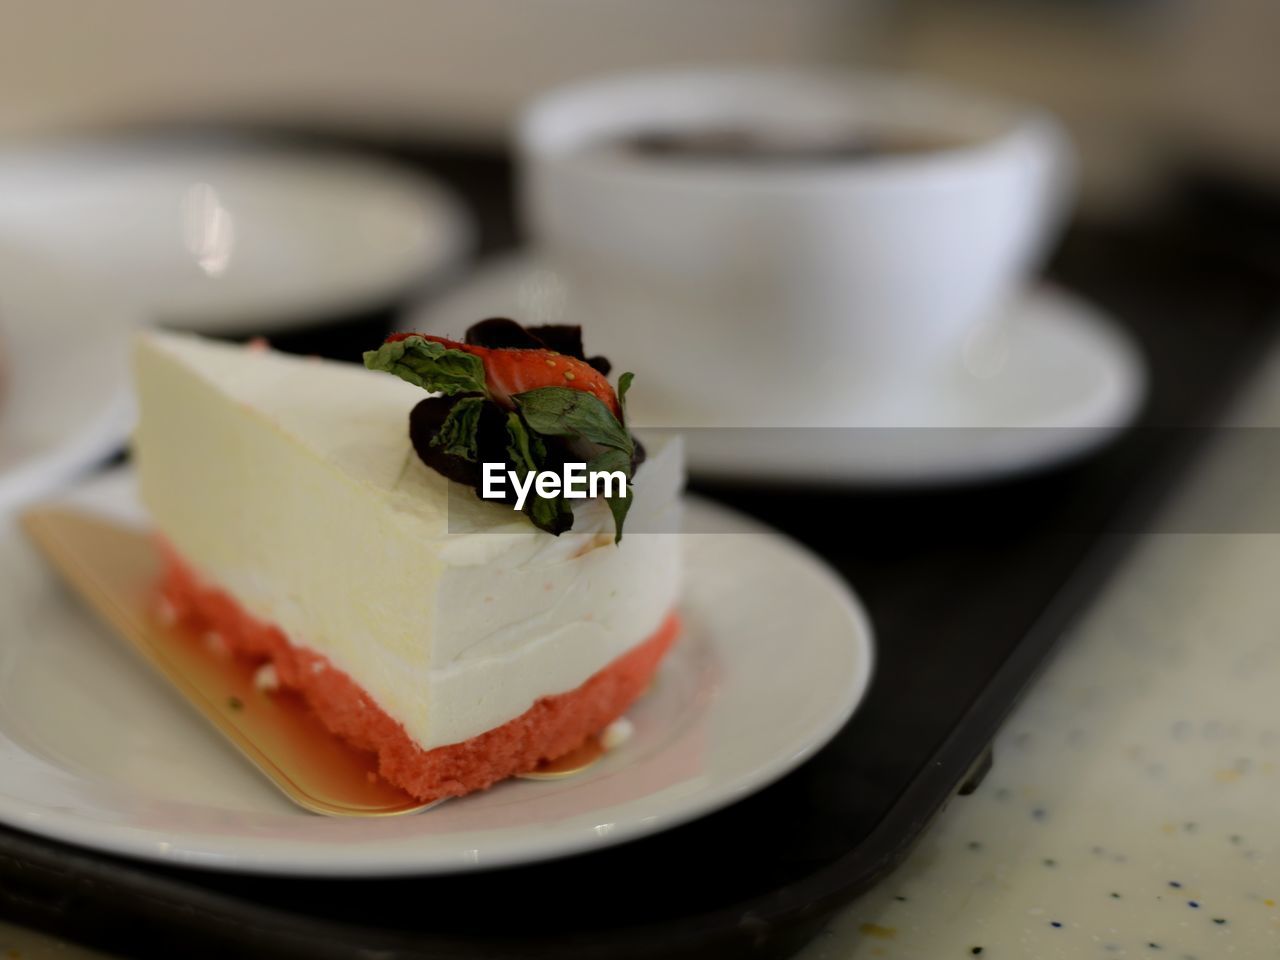 CLOSE-UP OF CAKE SERVED IN PLATE